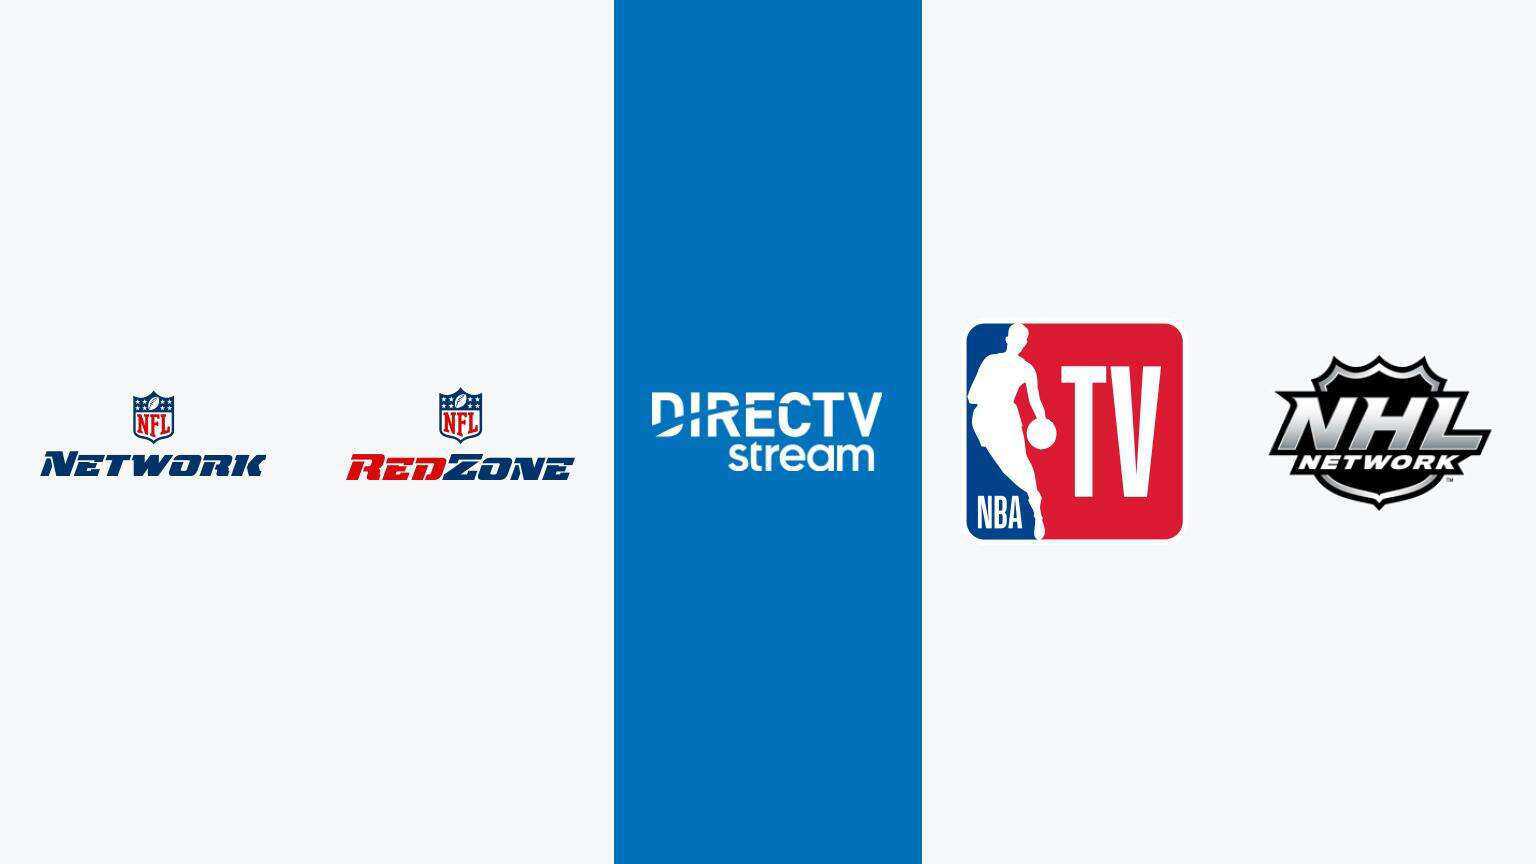 DIRECTV Satellite Offering New Customers Sports Pack Free for 3